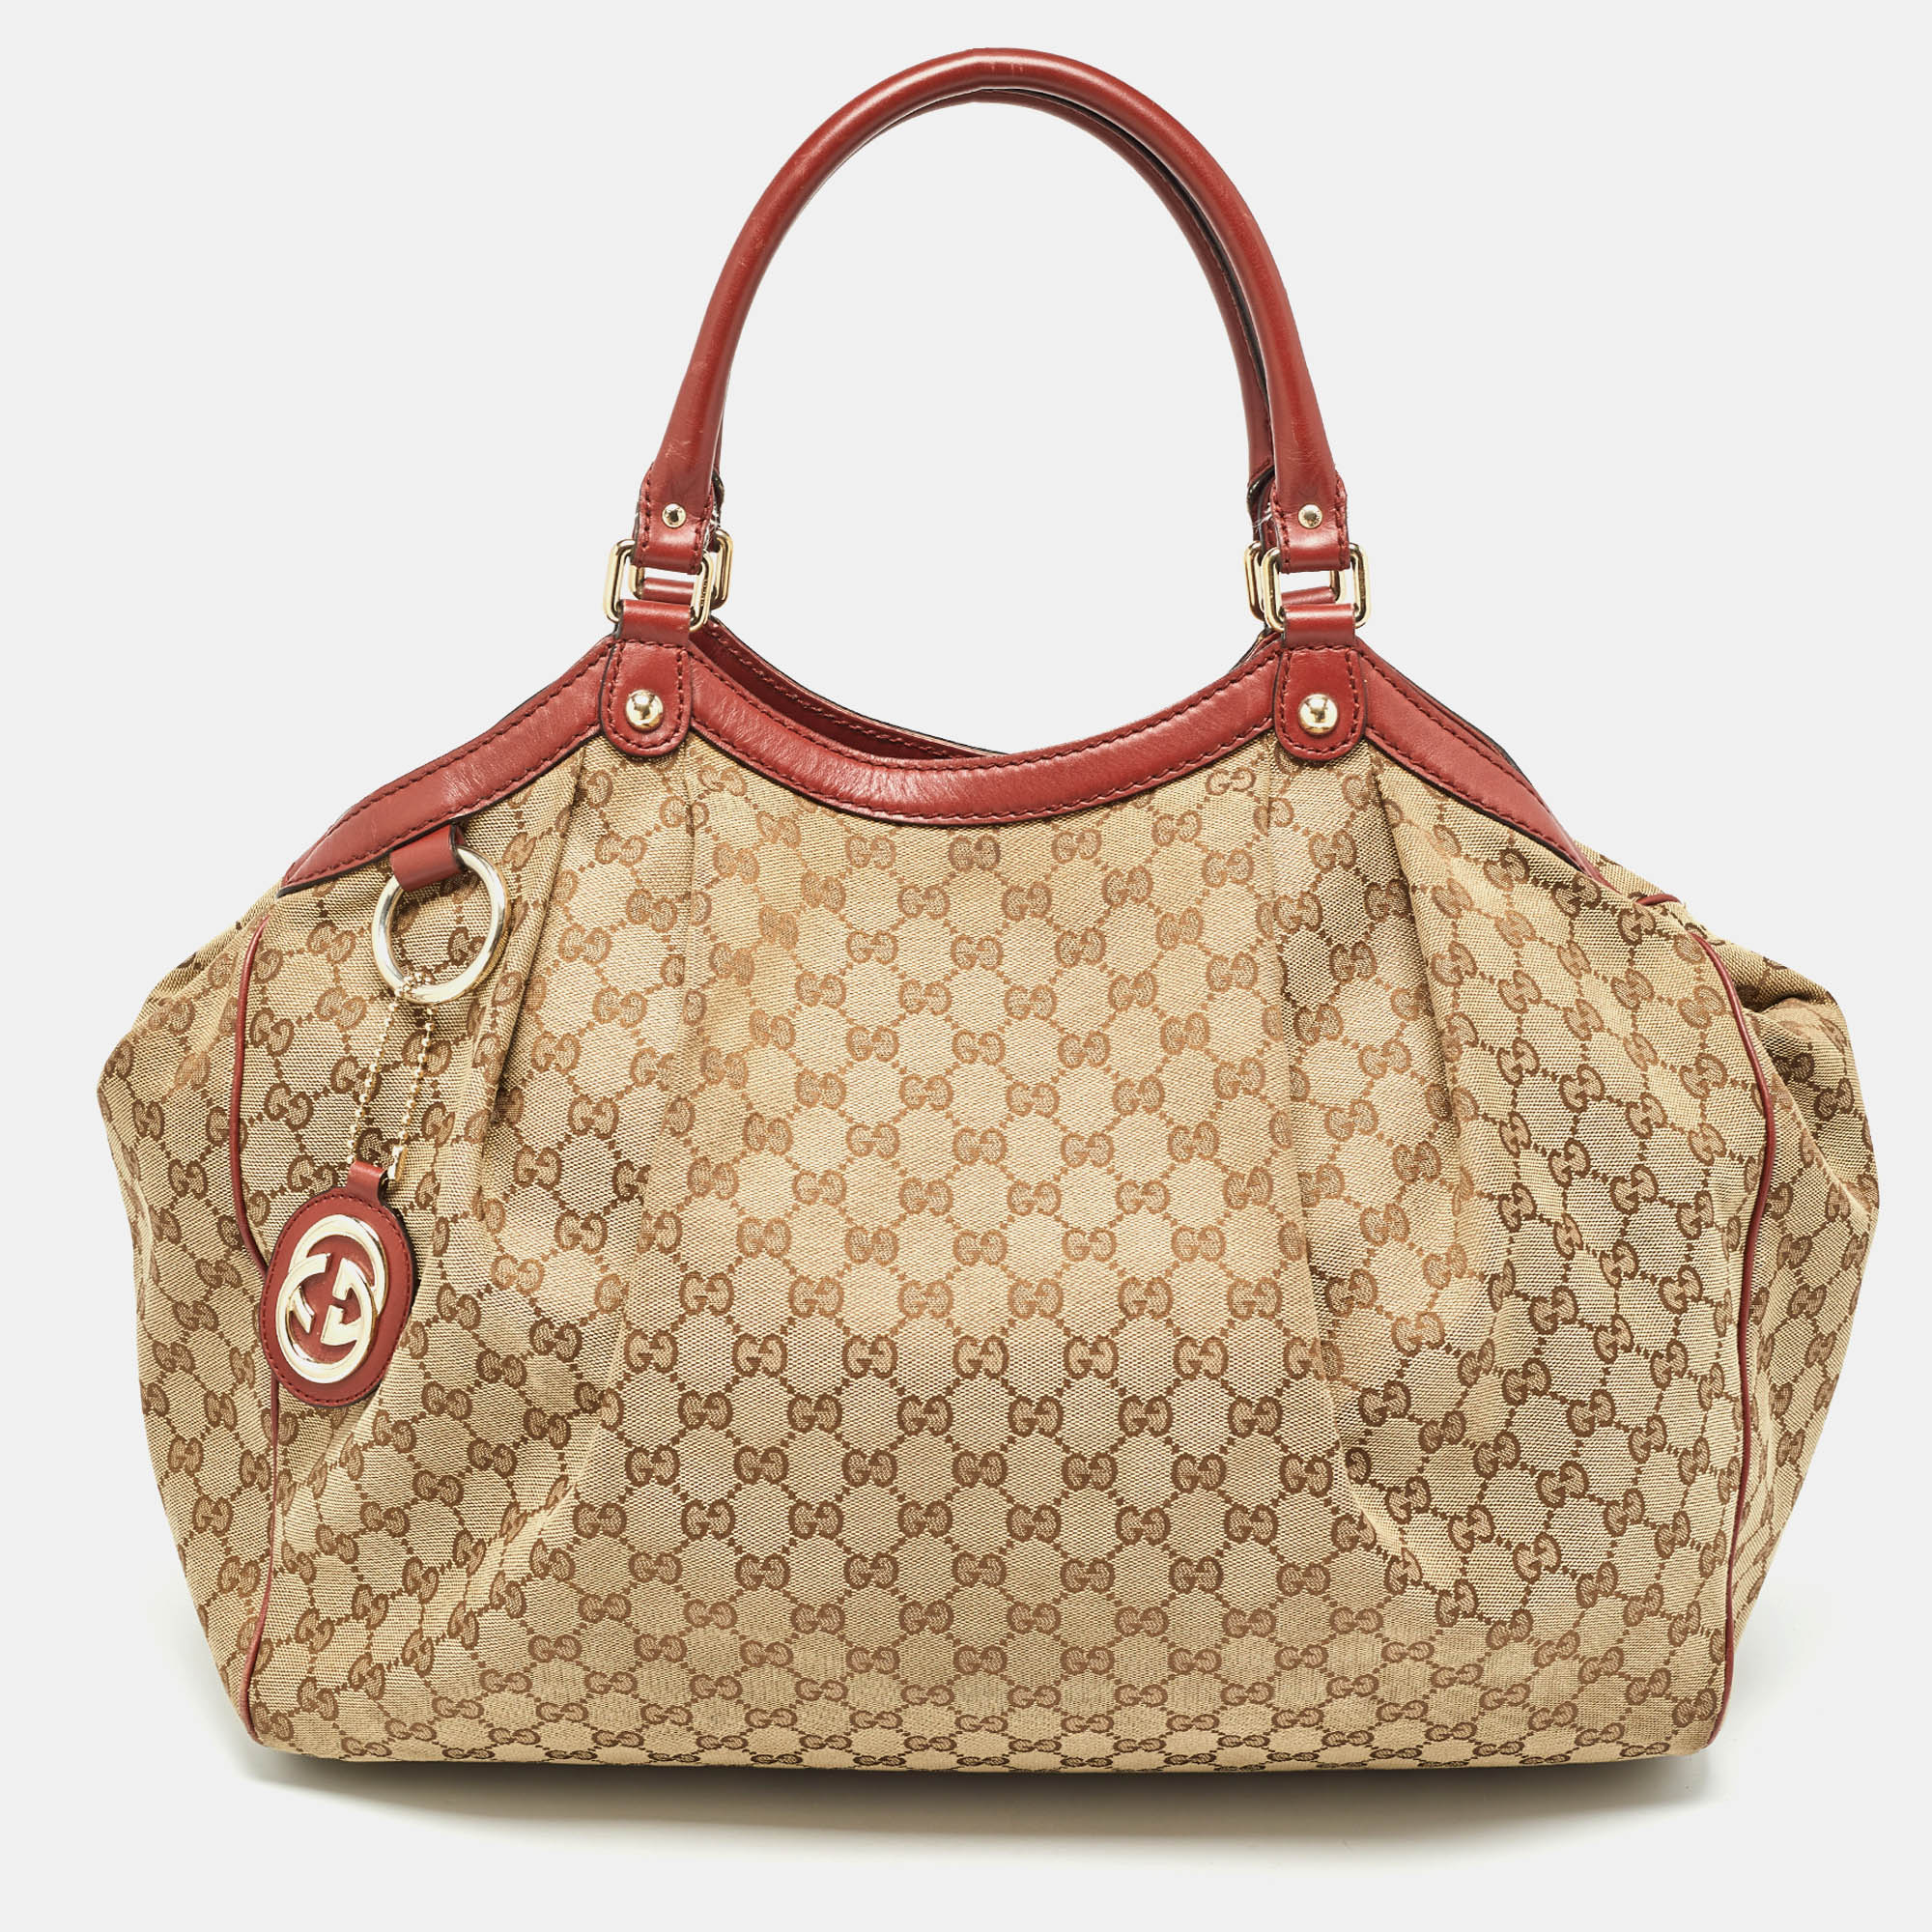 Gucci red/beige gg canvas and leather large sukey tote